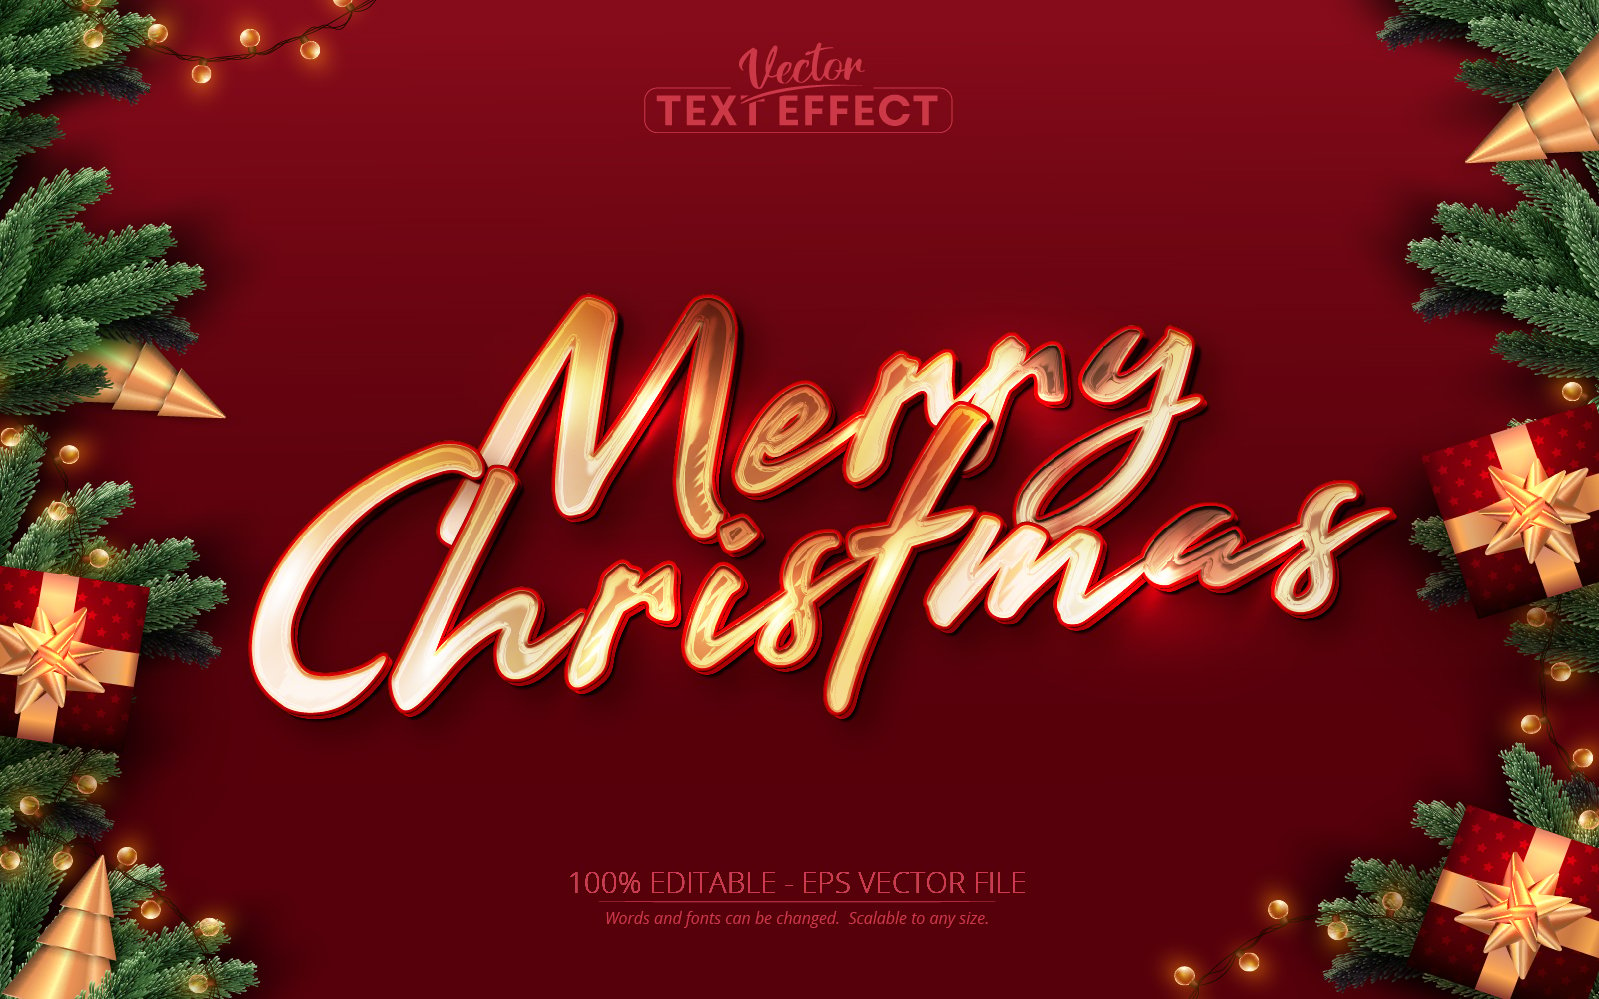 Merry Christmas - Editable Text Effect, Christmas Shiny Golden Text Style, Graphics Illustration